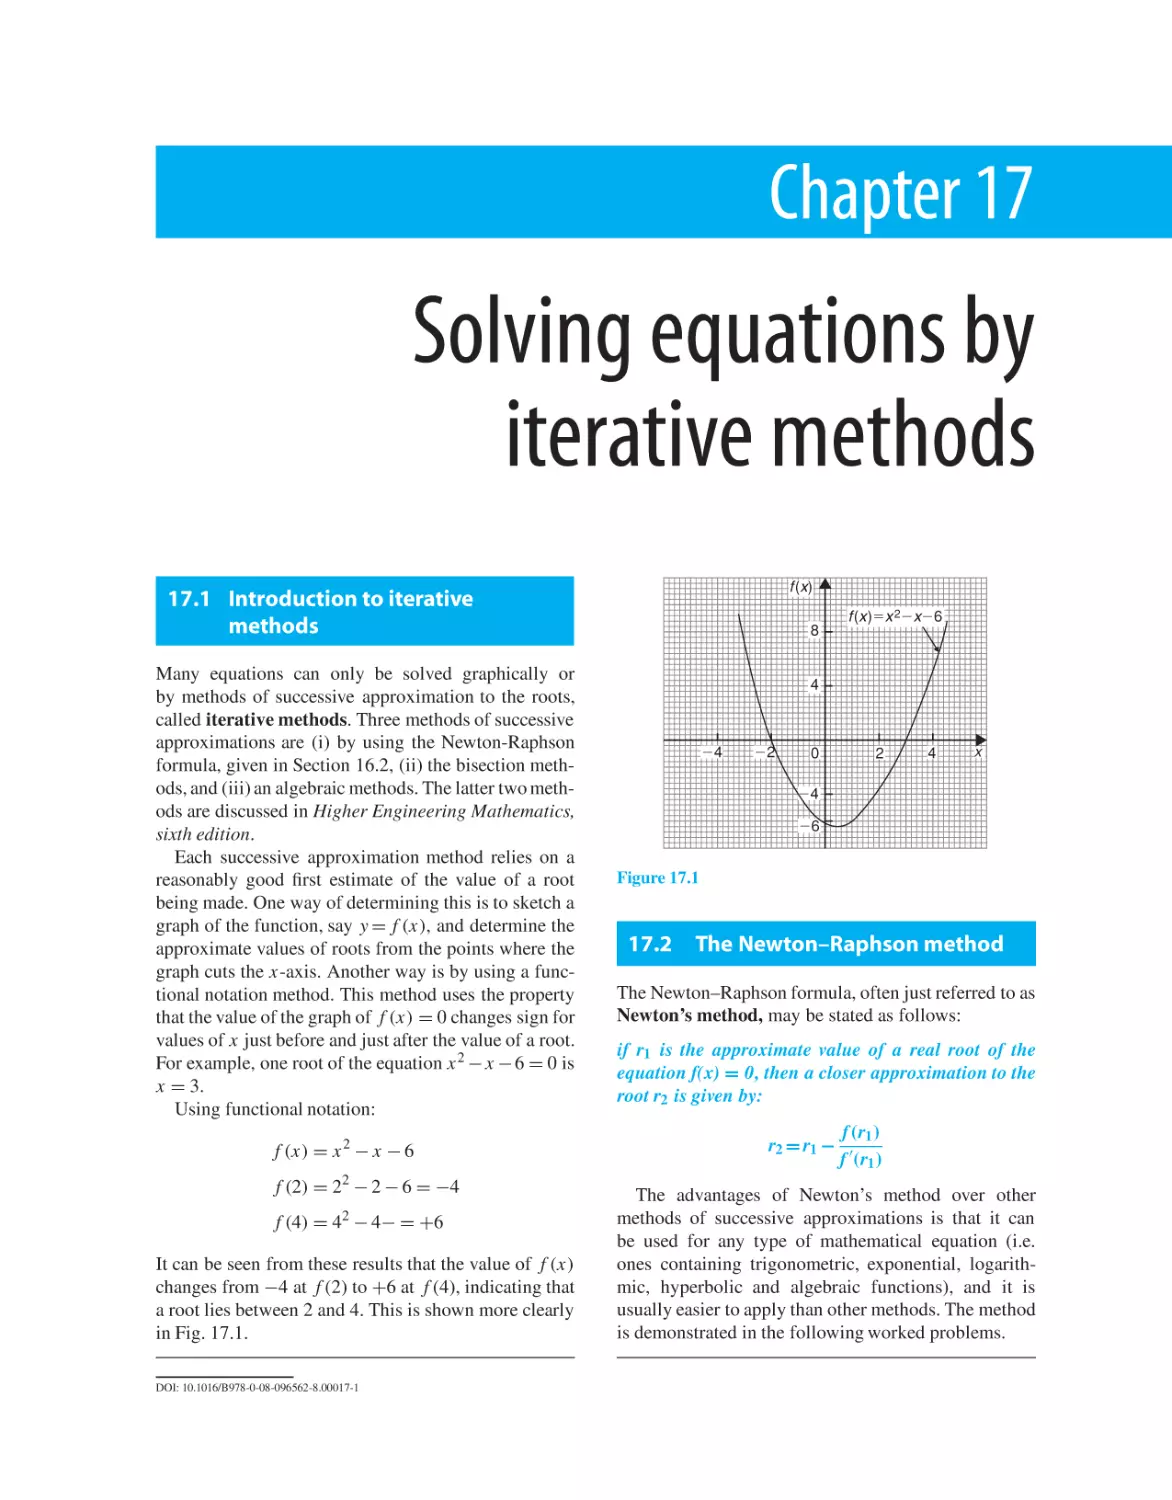 Chapter 17. Solving equations by iterative methods
17.1 Introduction to iterative methods
17.2 The Newton–Raphson method